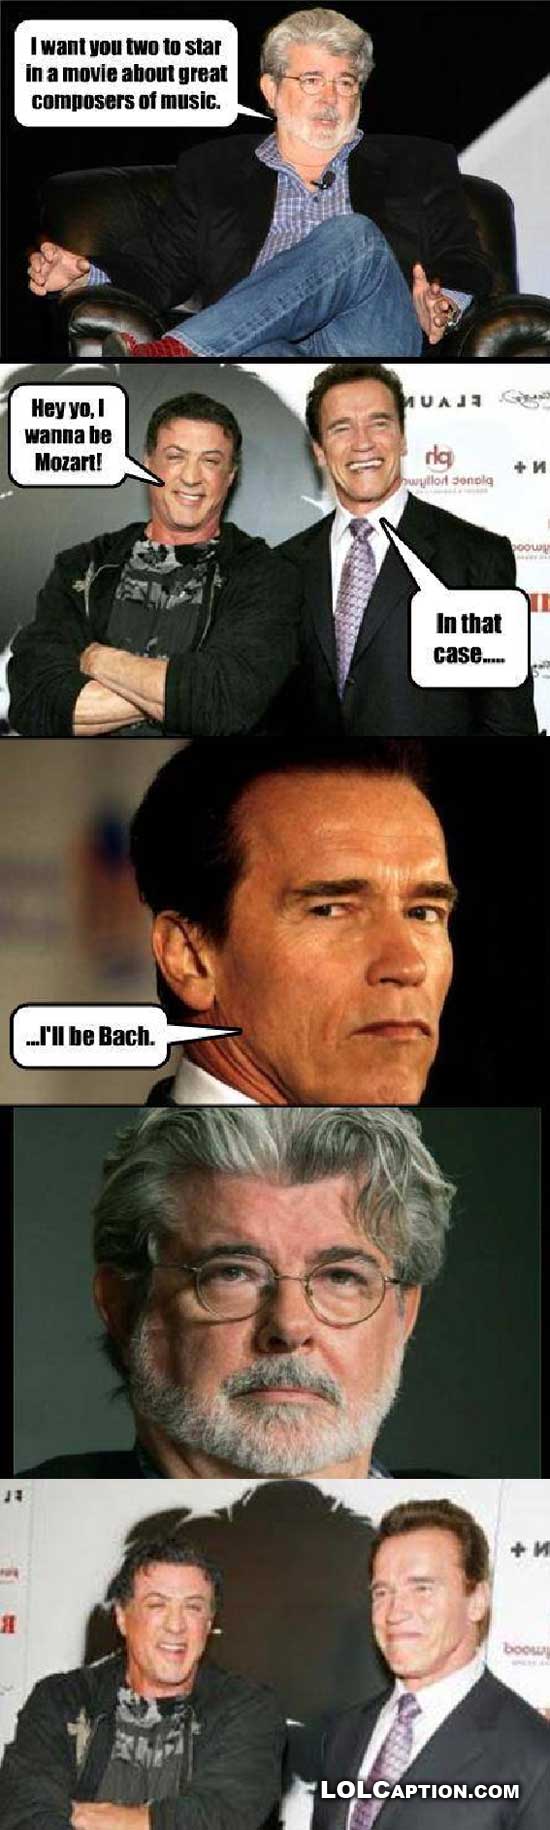 funny-arnold-comic-ill-be-bach-lol